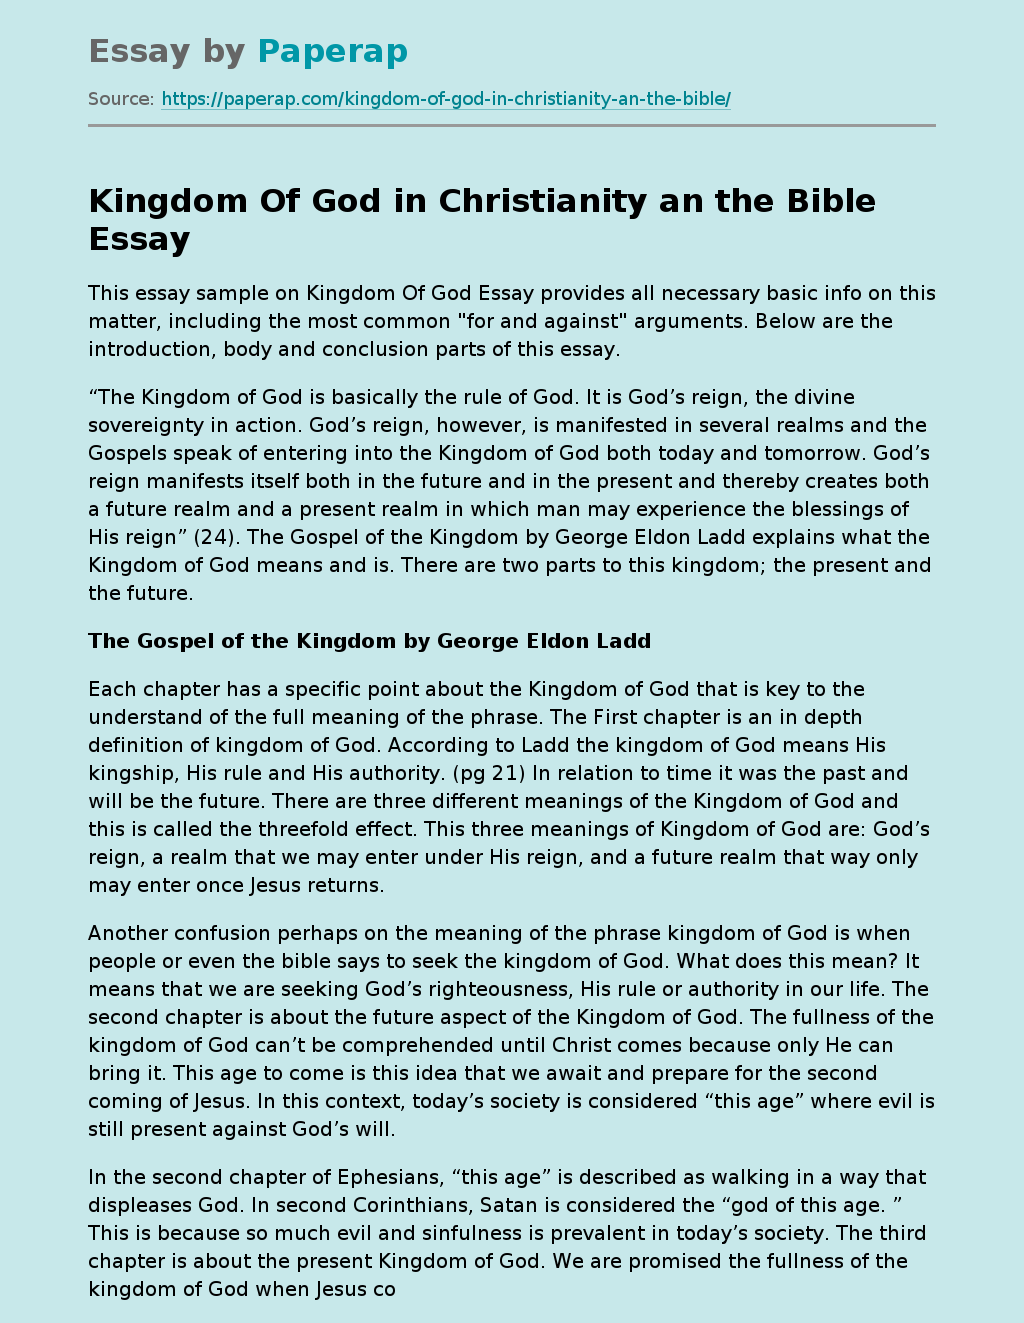 Kingdom Of God in Christianity an the Bible